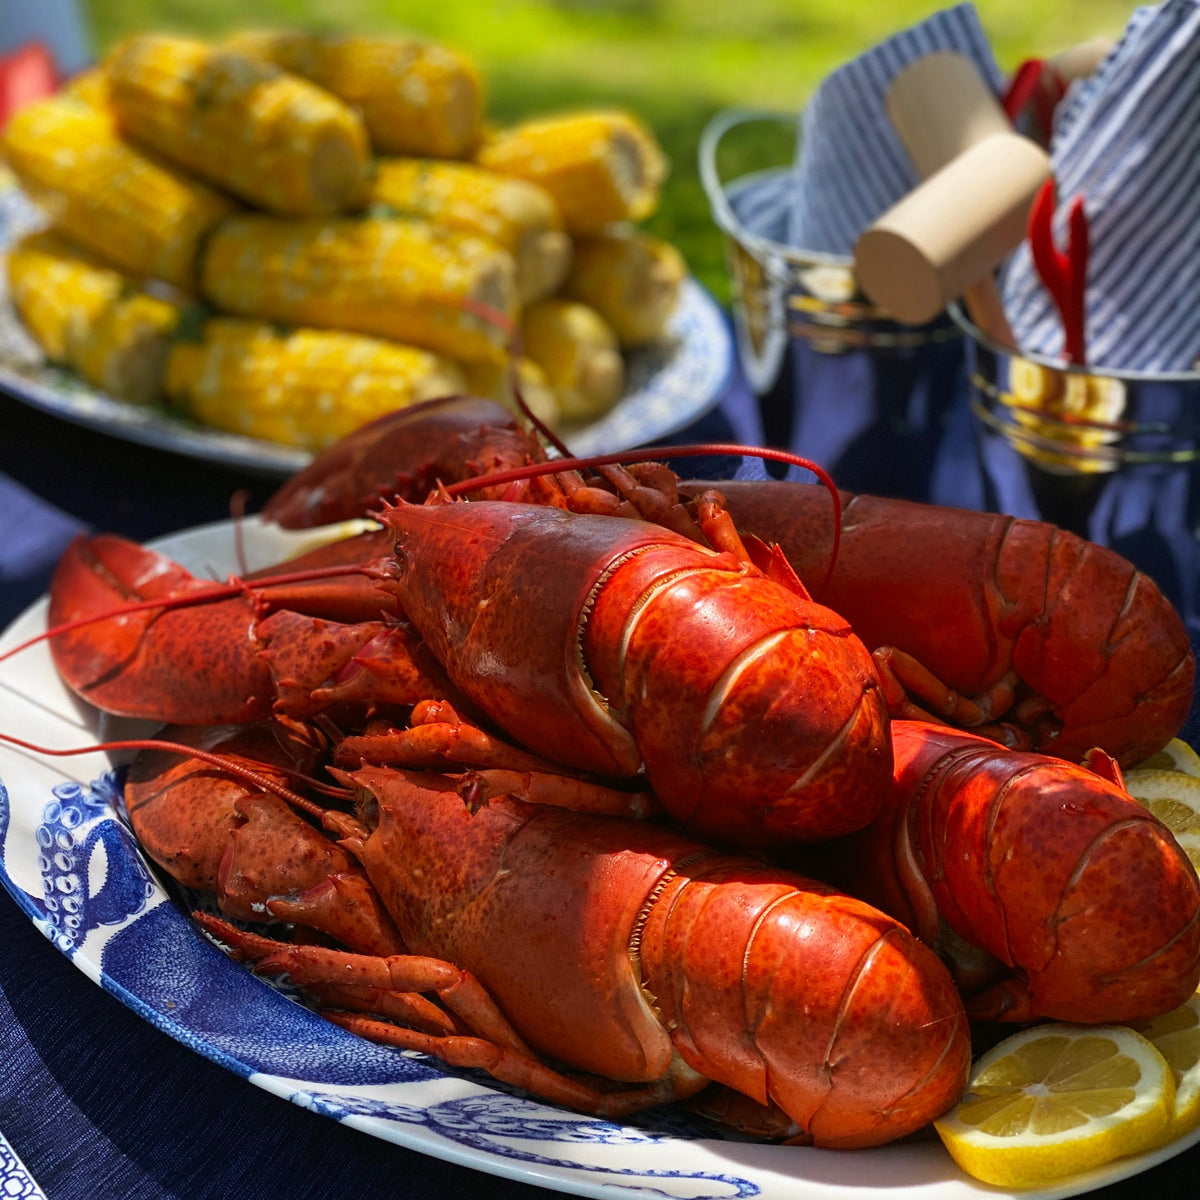 A plate of cooked lobsters is in the foreground, elegantly presented on a creamy white premium porcelain Lucy Oval Rimmed Platter by Caskata Artisanal Home and garnished with lemon slices. In the background, there is a dish of corn on the cob and a bucket with napkins and utensils.